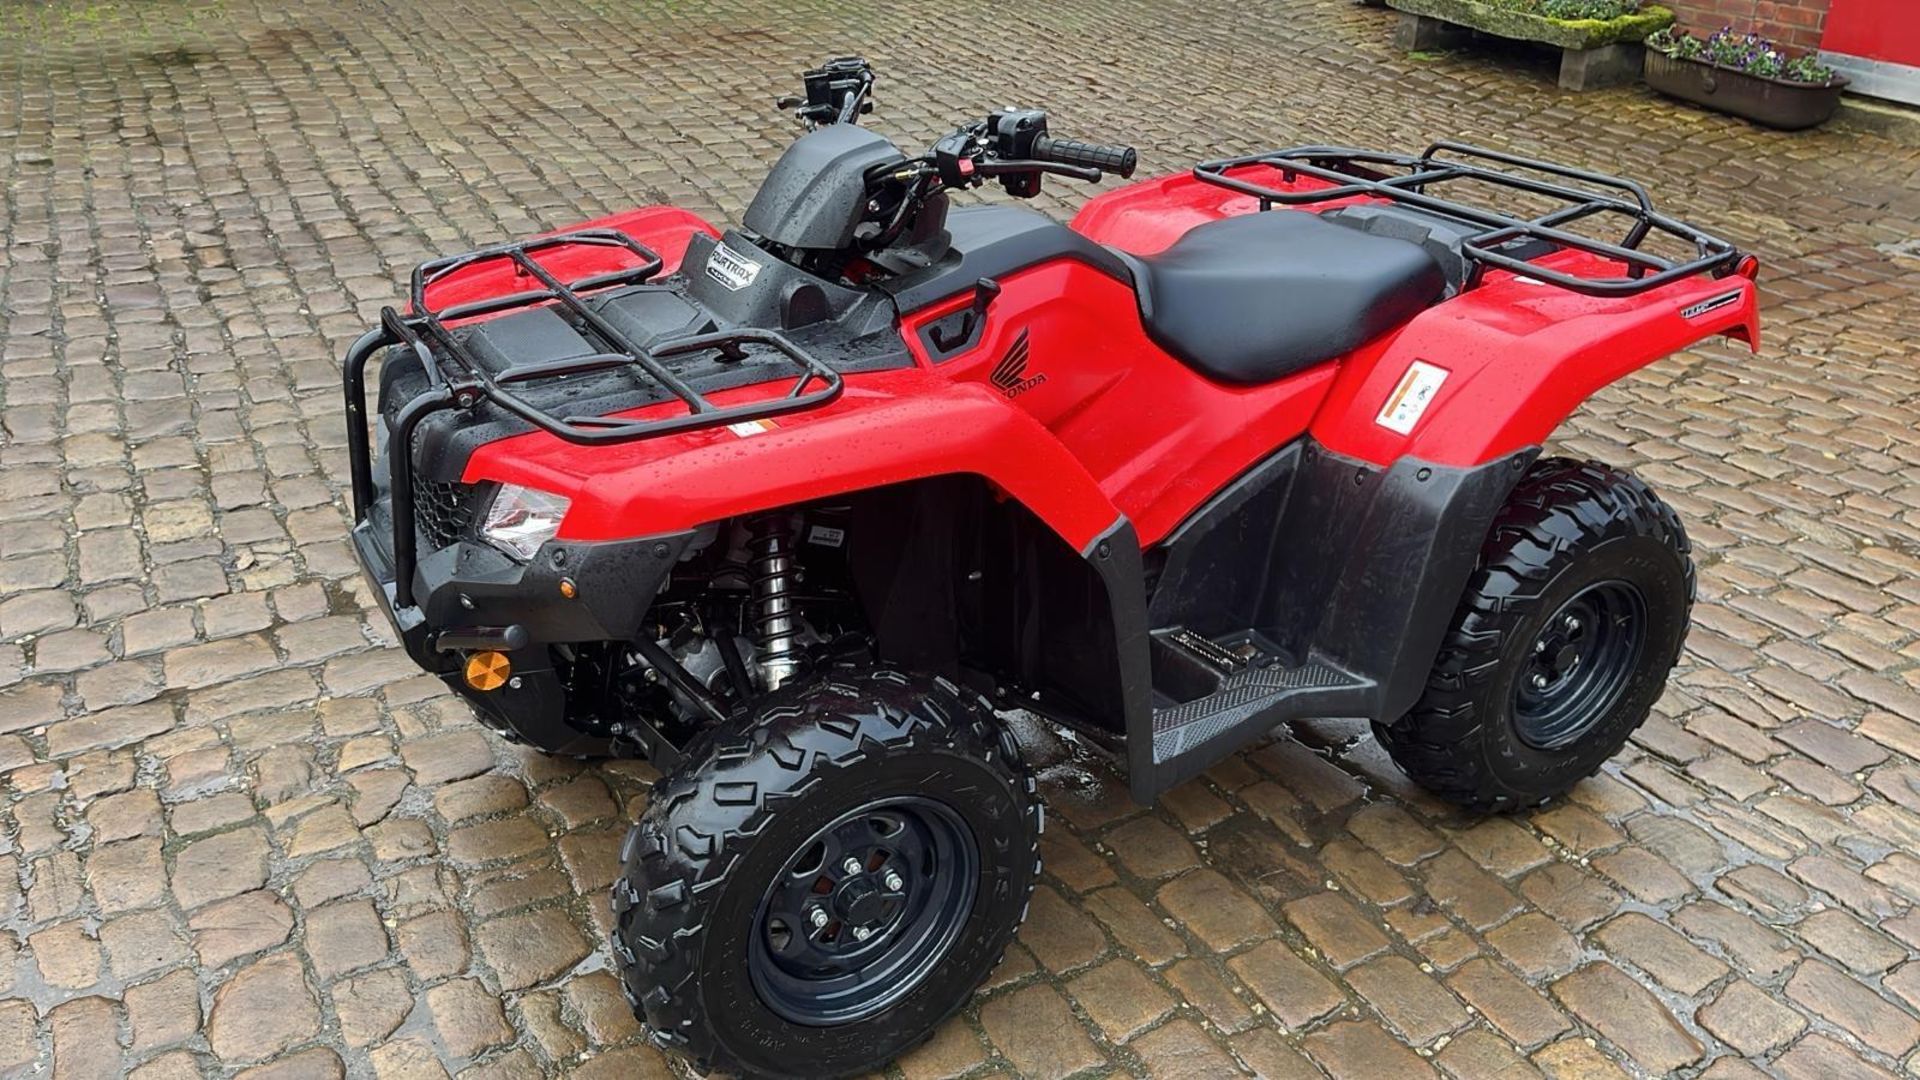 2018 HONDA TRX420FA6 FOURTRAX RANCHER AUTOMATIC DCT QUAD BIKE CAN BE SWITCED FROM 2 TO 4 WHEEL DRIVE - Image 12 of 21